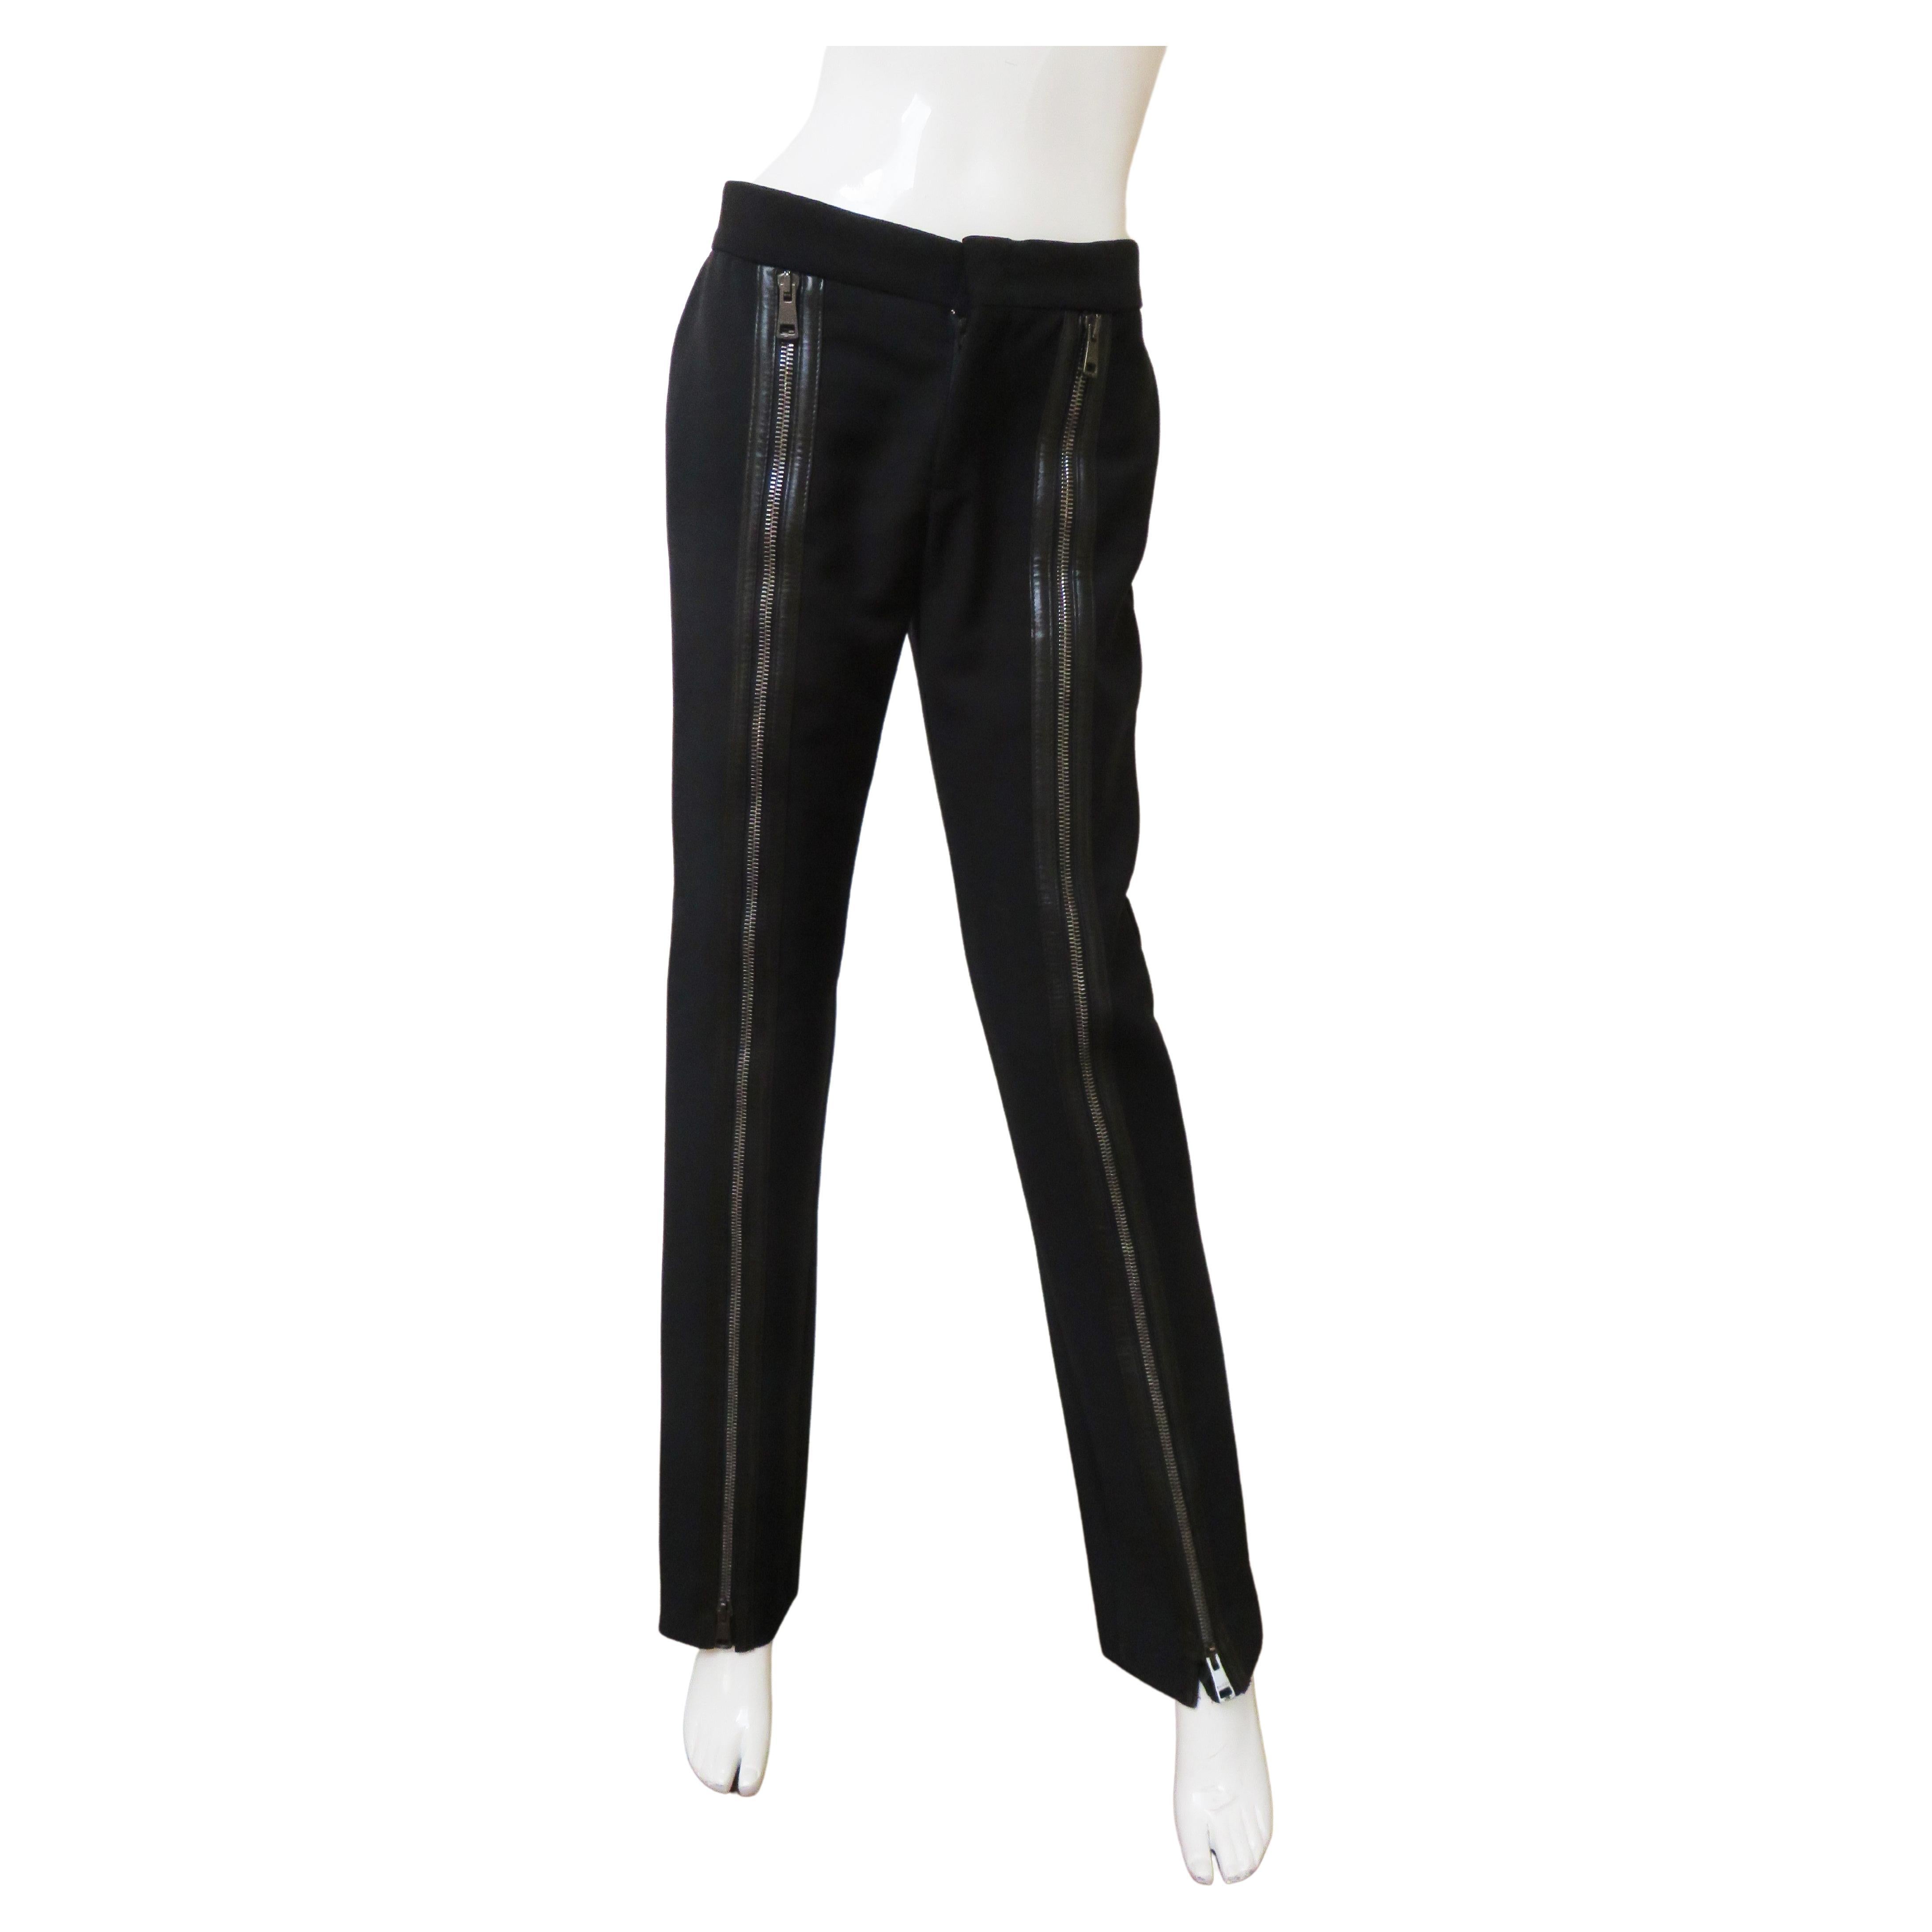 Tom Ford for Gucci Pants with Zipper Legs A/W 2001 For Sale